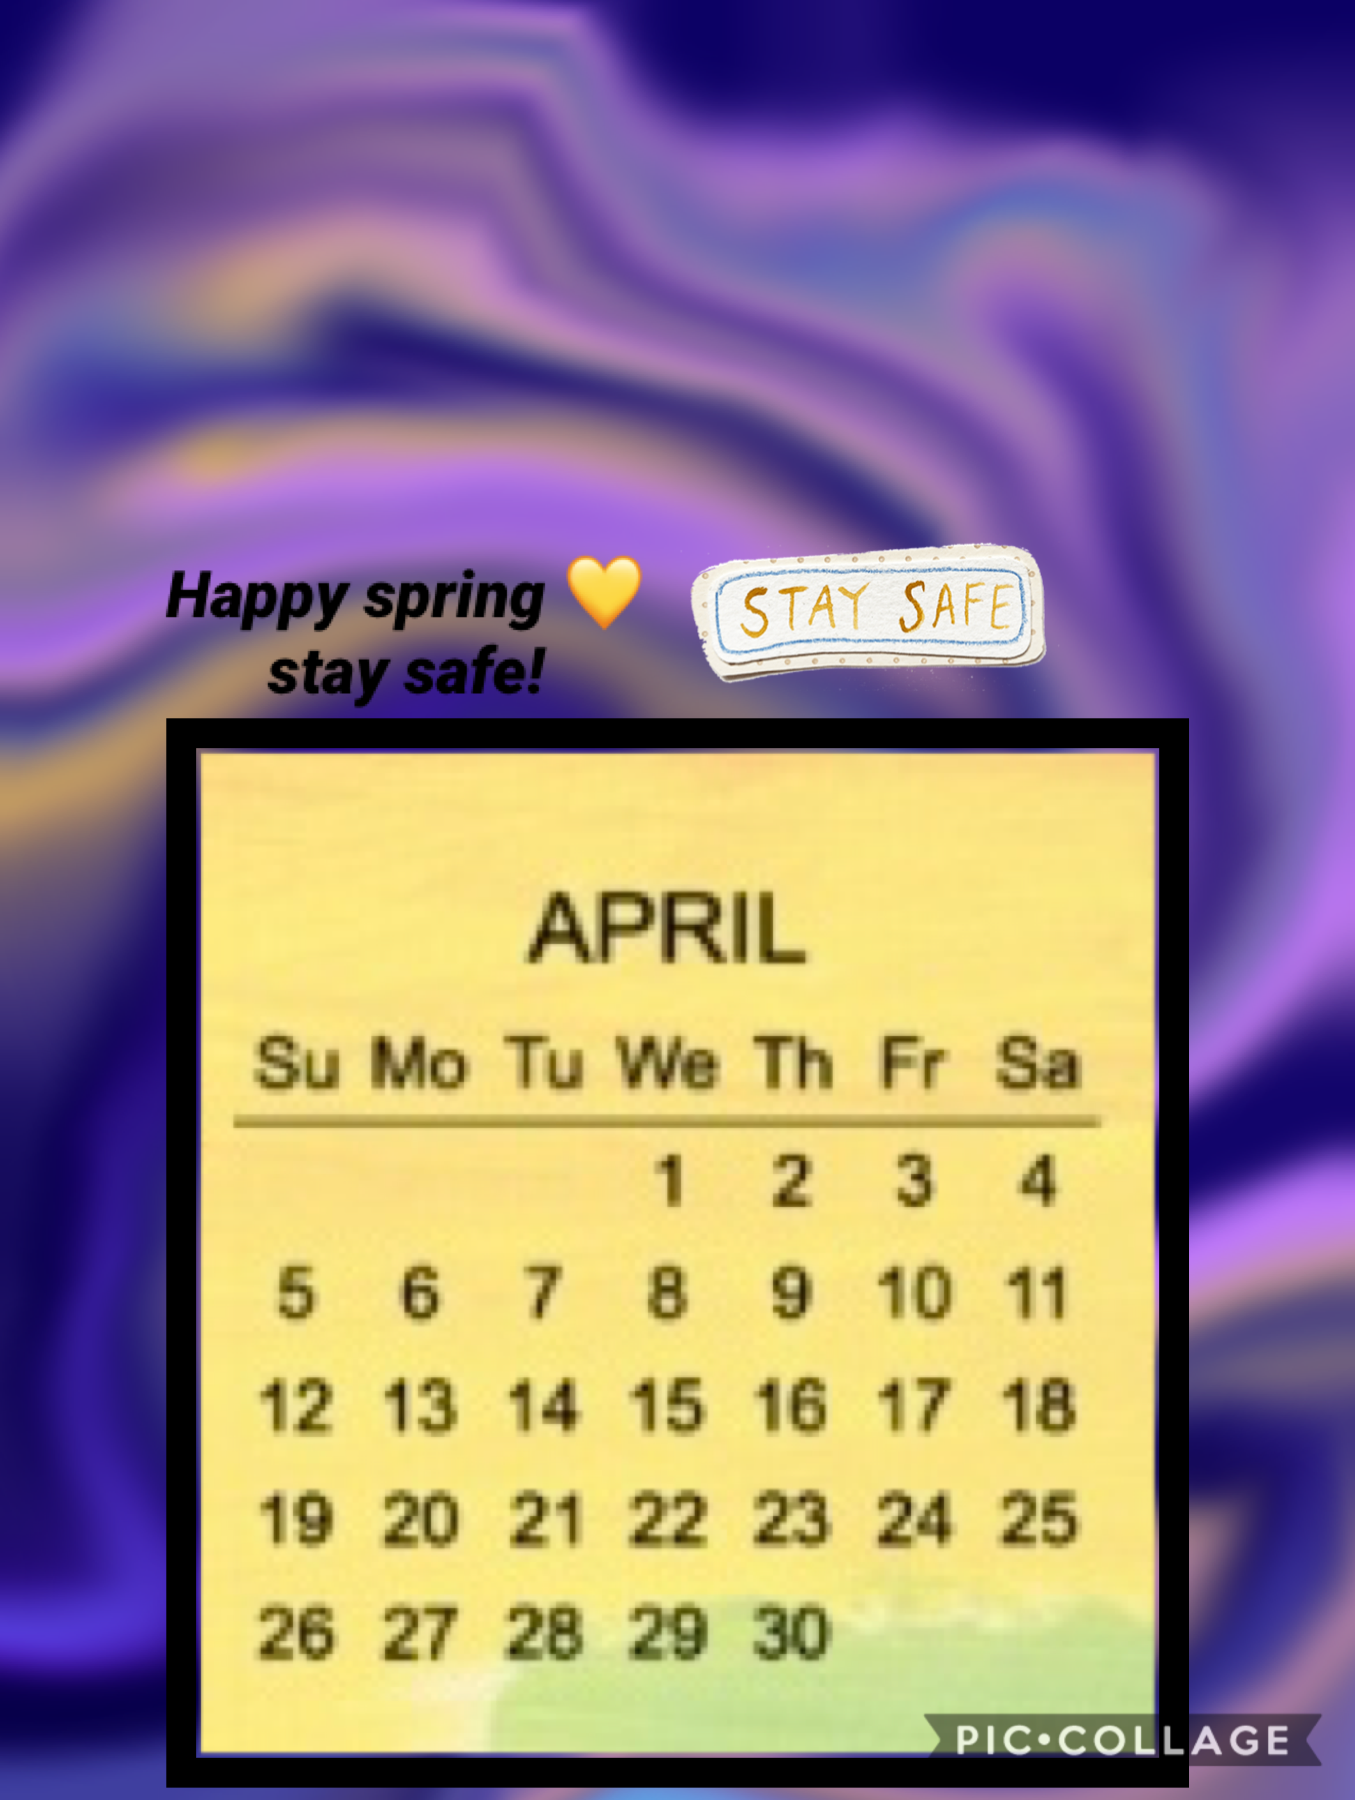 Happy spring! New background for April! ❤️🧡💛💚💙💜